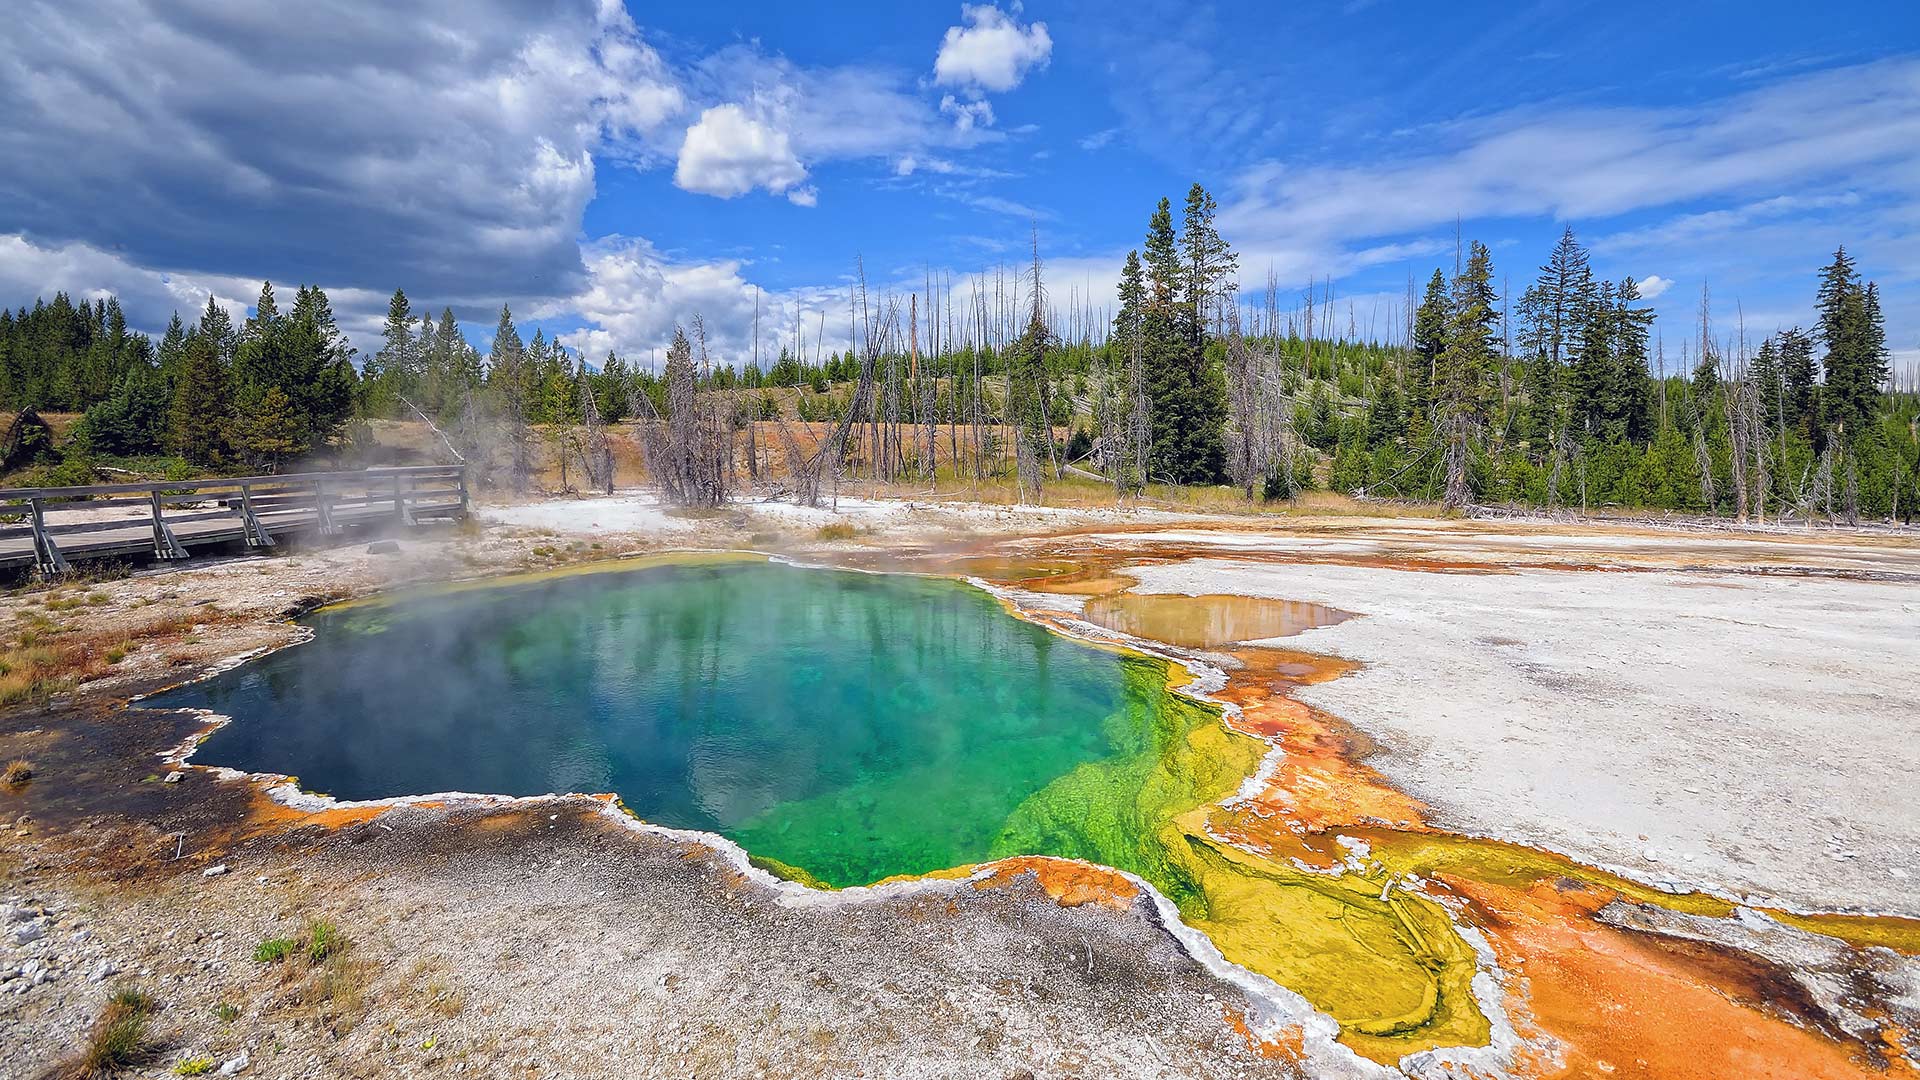 Yellowstone Geyser during the day